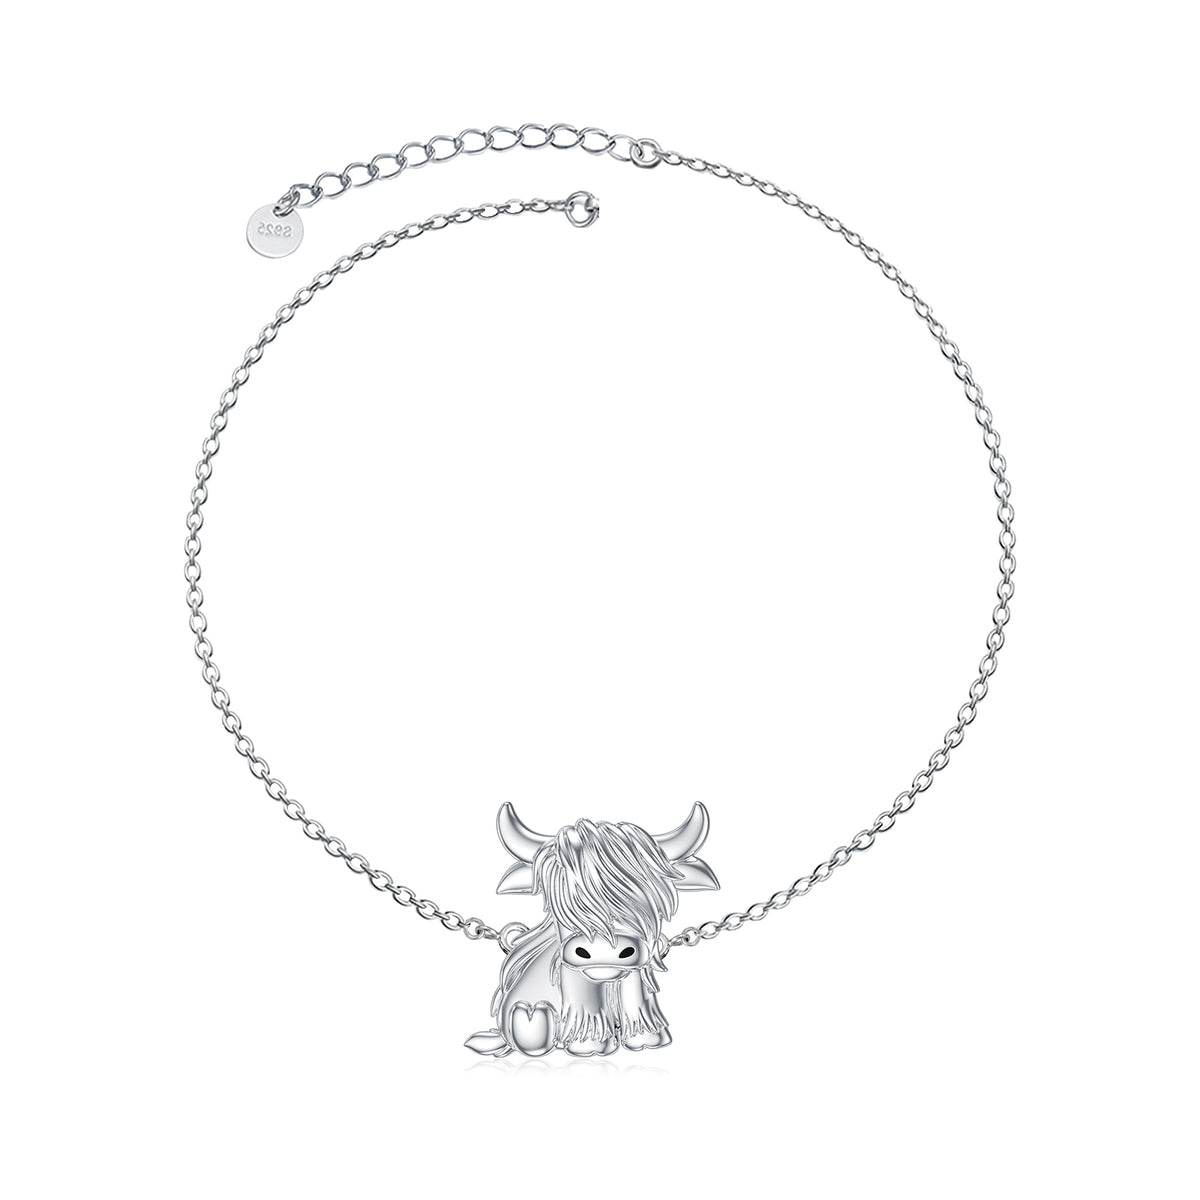 Highland Cow Necklace Anklet for Women 925 Sterling Silver Cow Crystal Necklace